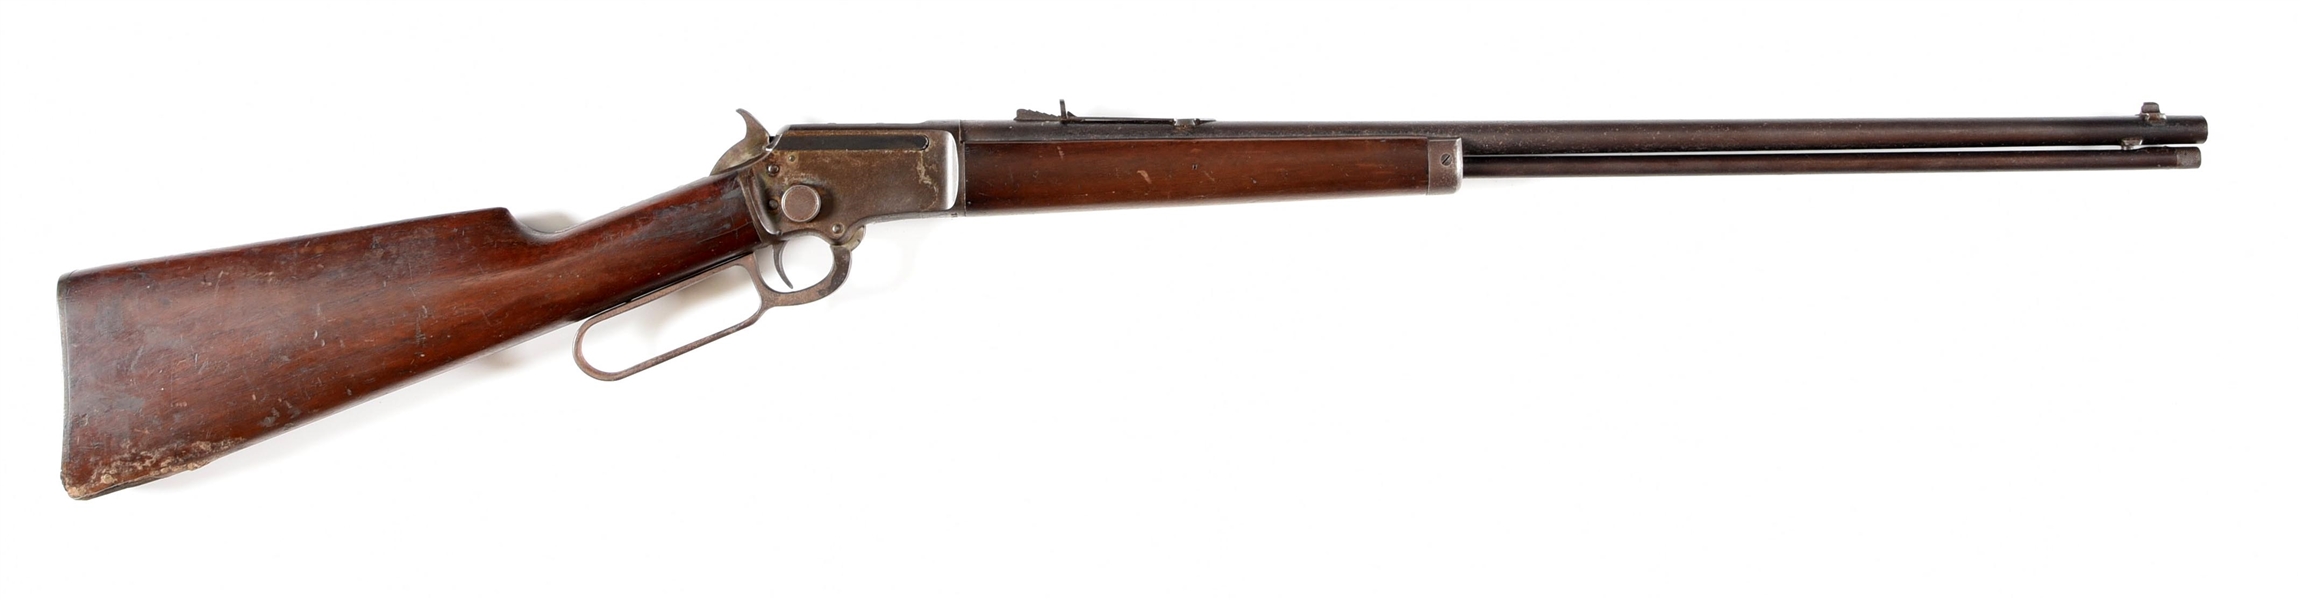 MARLIN MODEL 97 LEVER ACTION RIFLE.